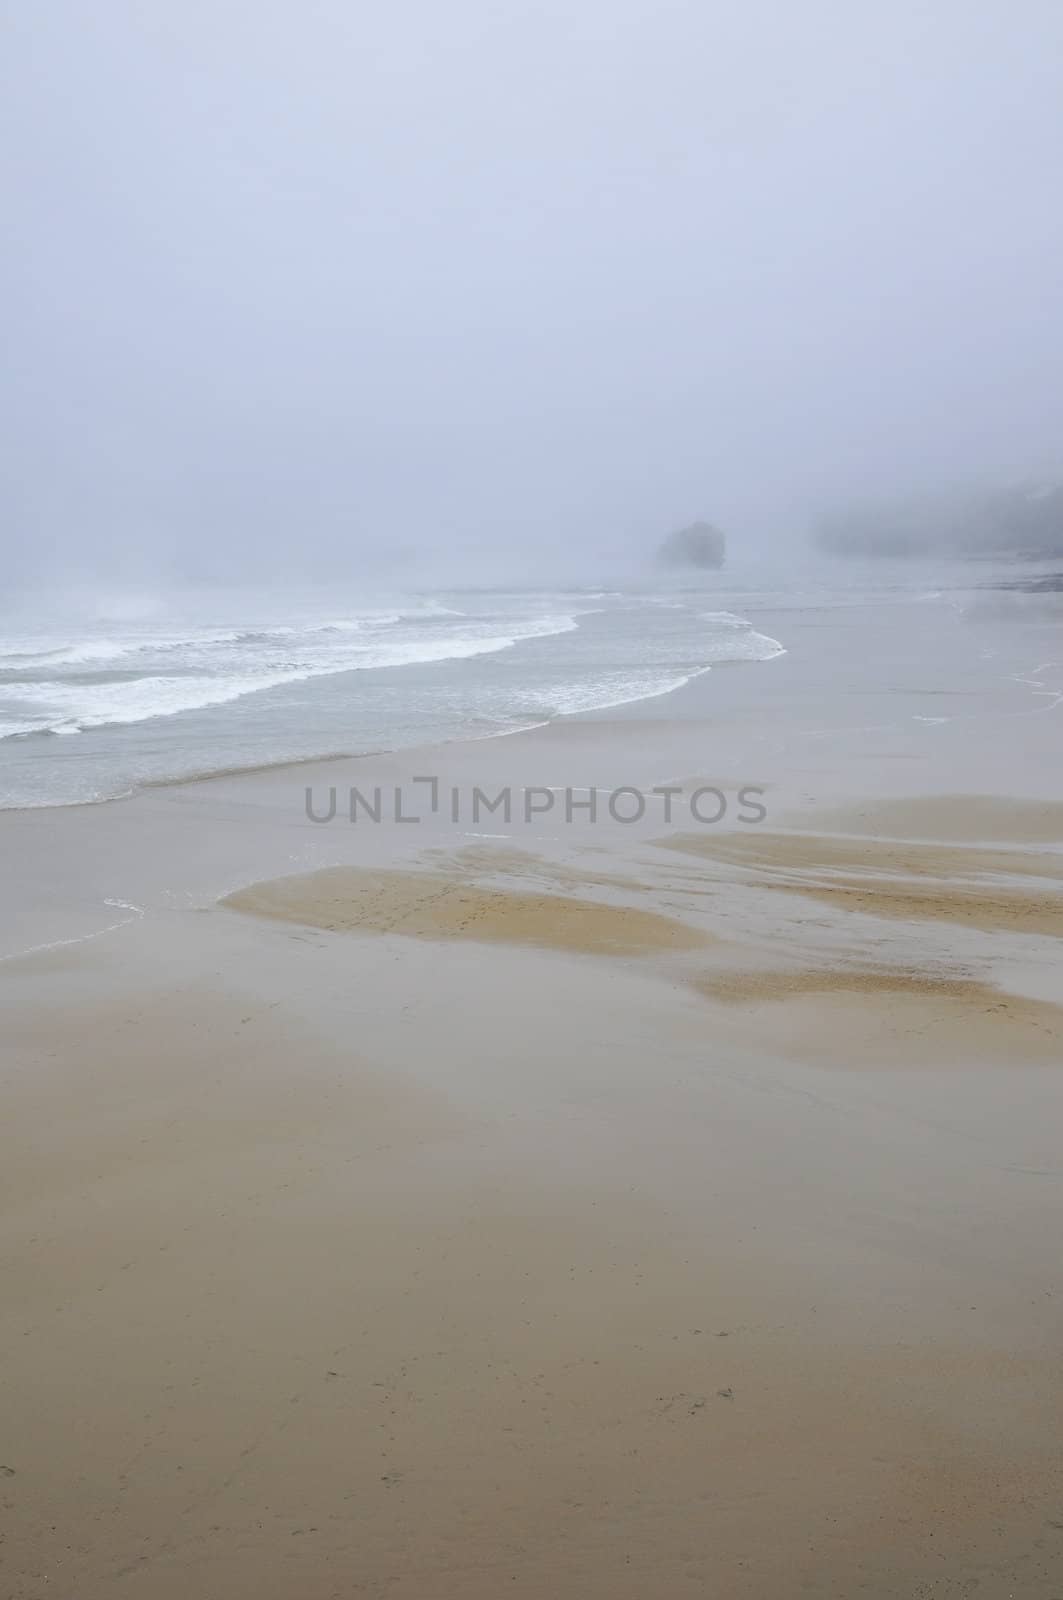 Beach and some rocks under the rain with a misty weather